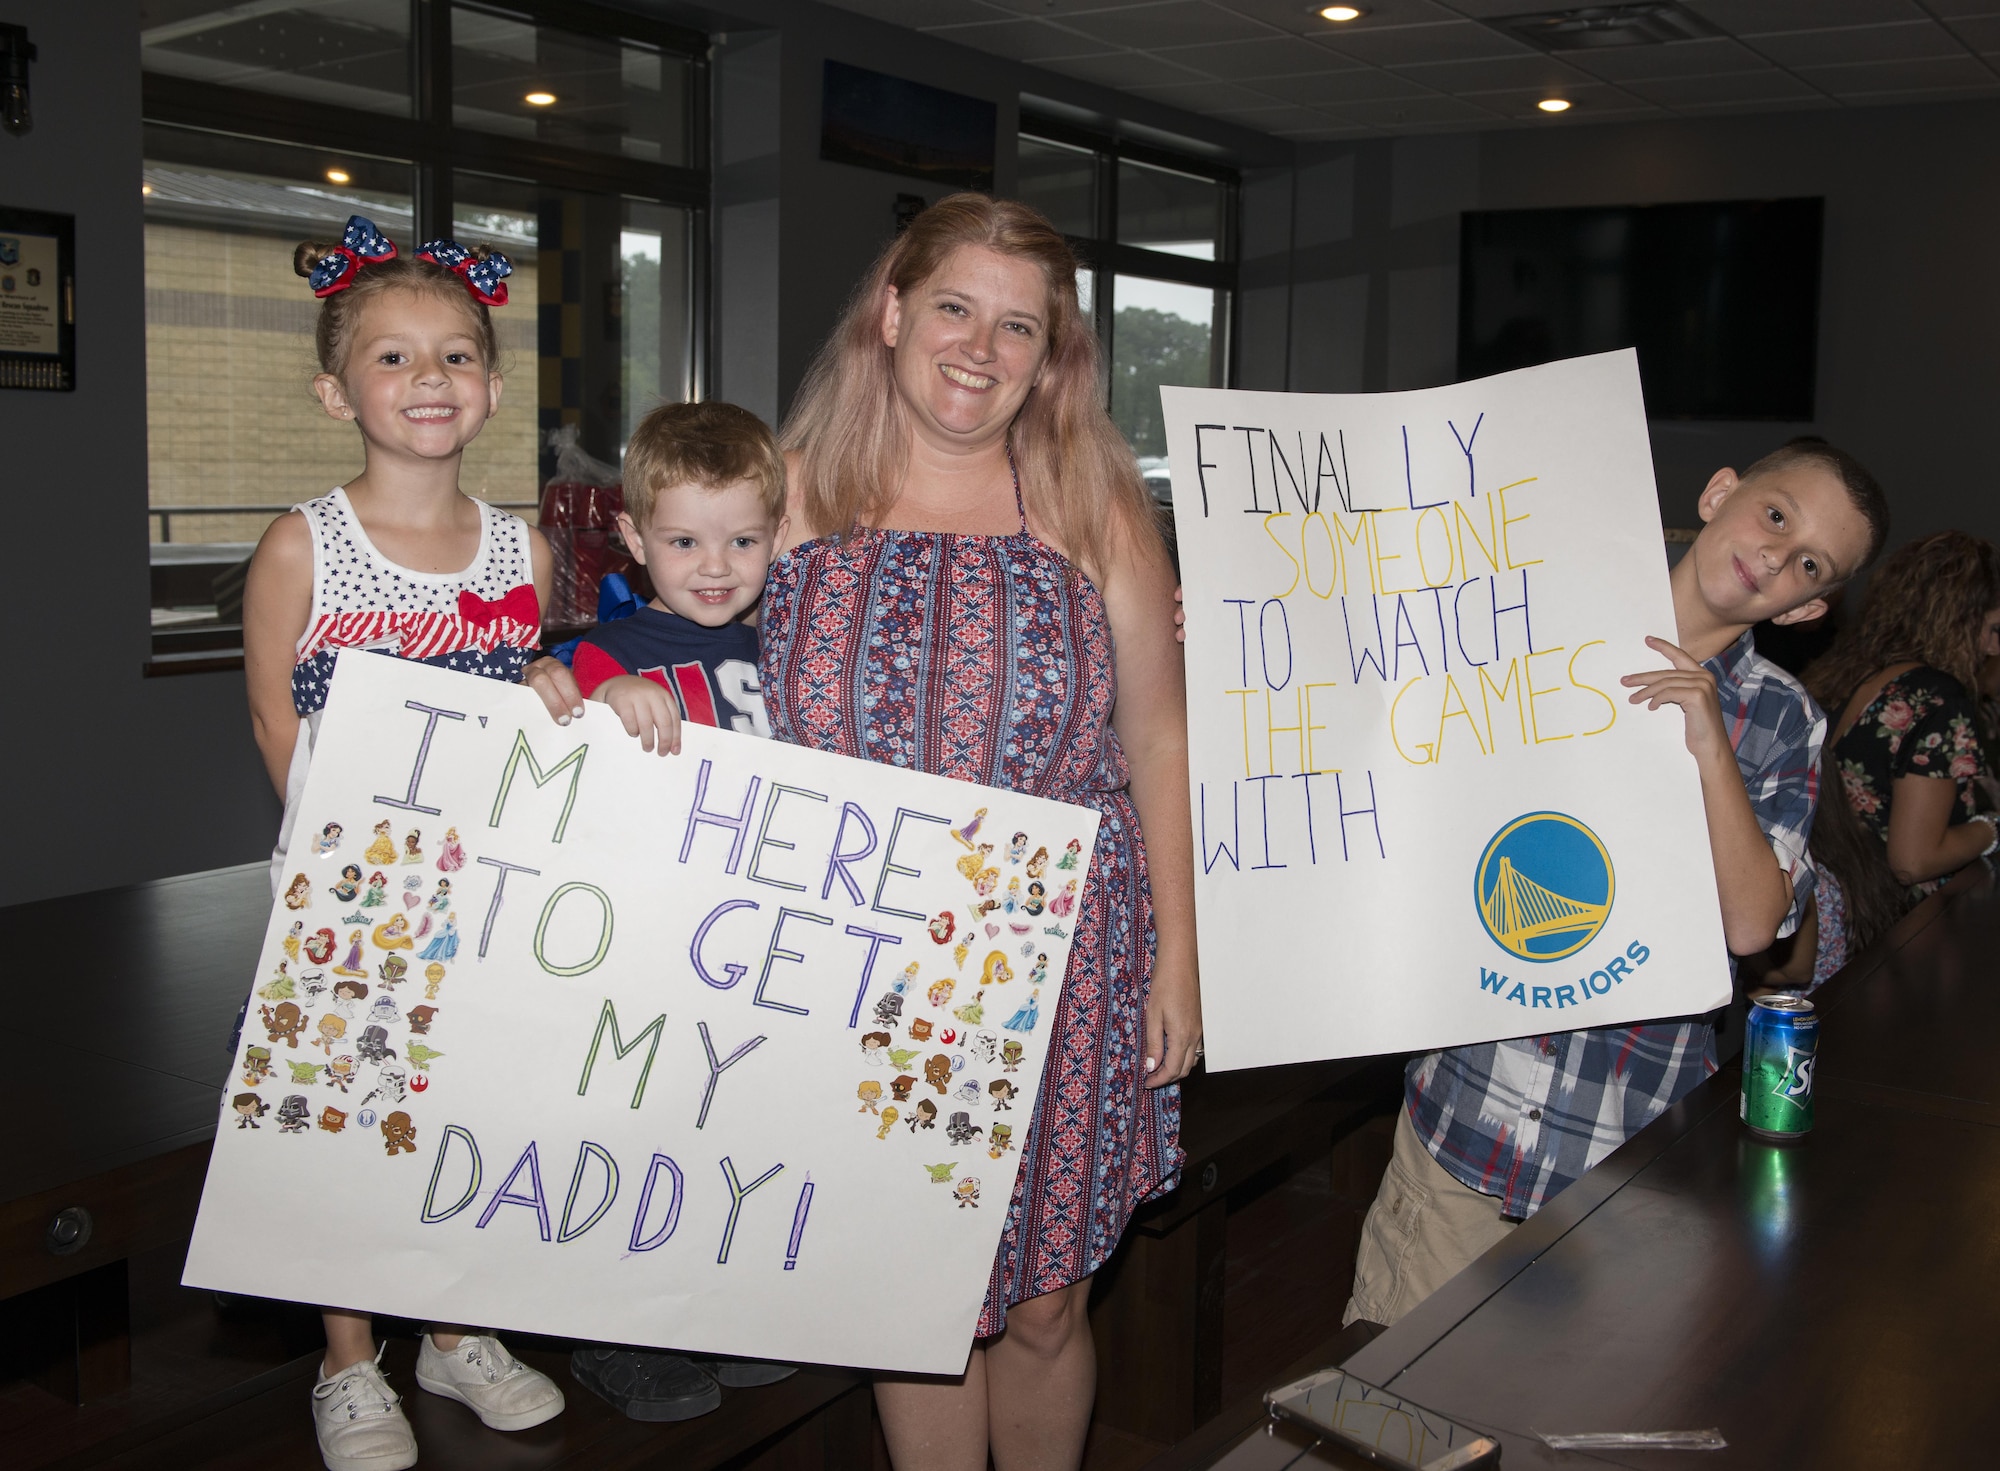 Family and friends hold signs during a redeployment, June 6, 2017, at Moody Air Force Base, Ga. The 41st and 71st Rescue Squadrons were recently deployed to Southwest Asia where they provided combat search and rescue capabilities in support of Operation Inherent Resolve. (U.S. Air Force photo by Airman 1st Class Lauren M. Sprunk)